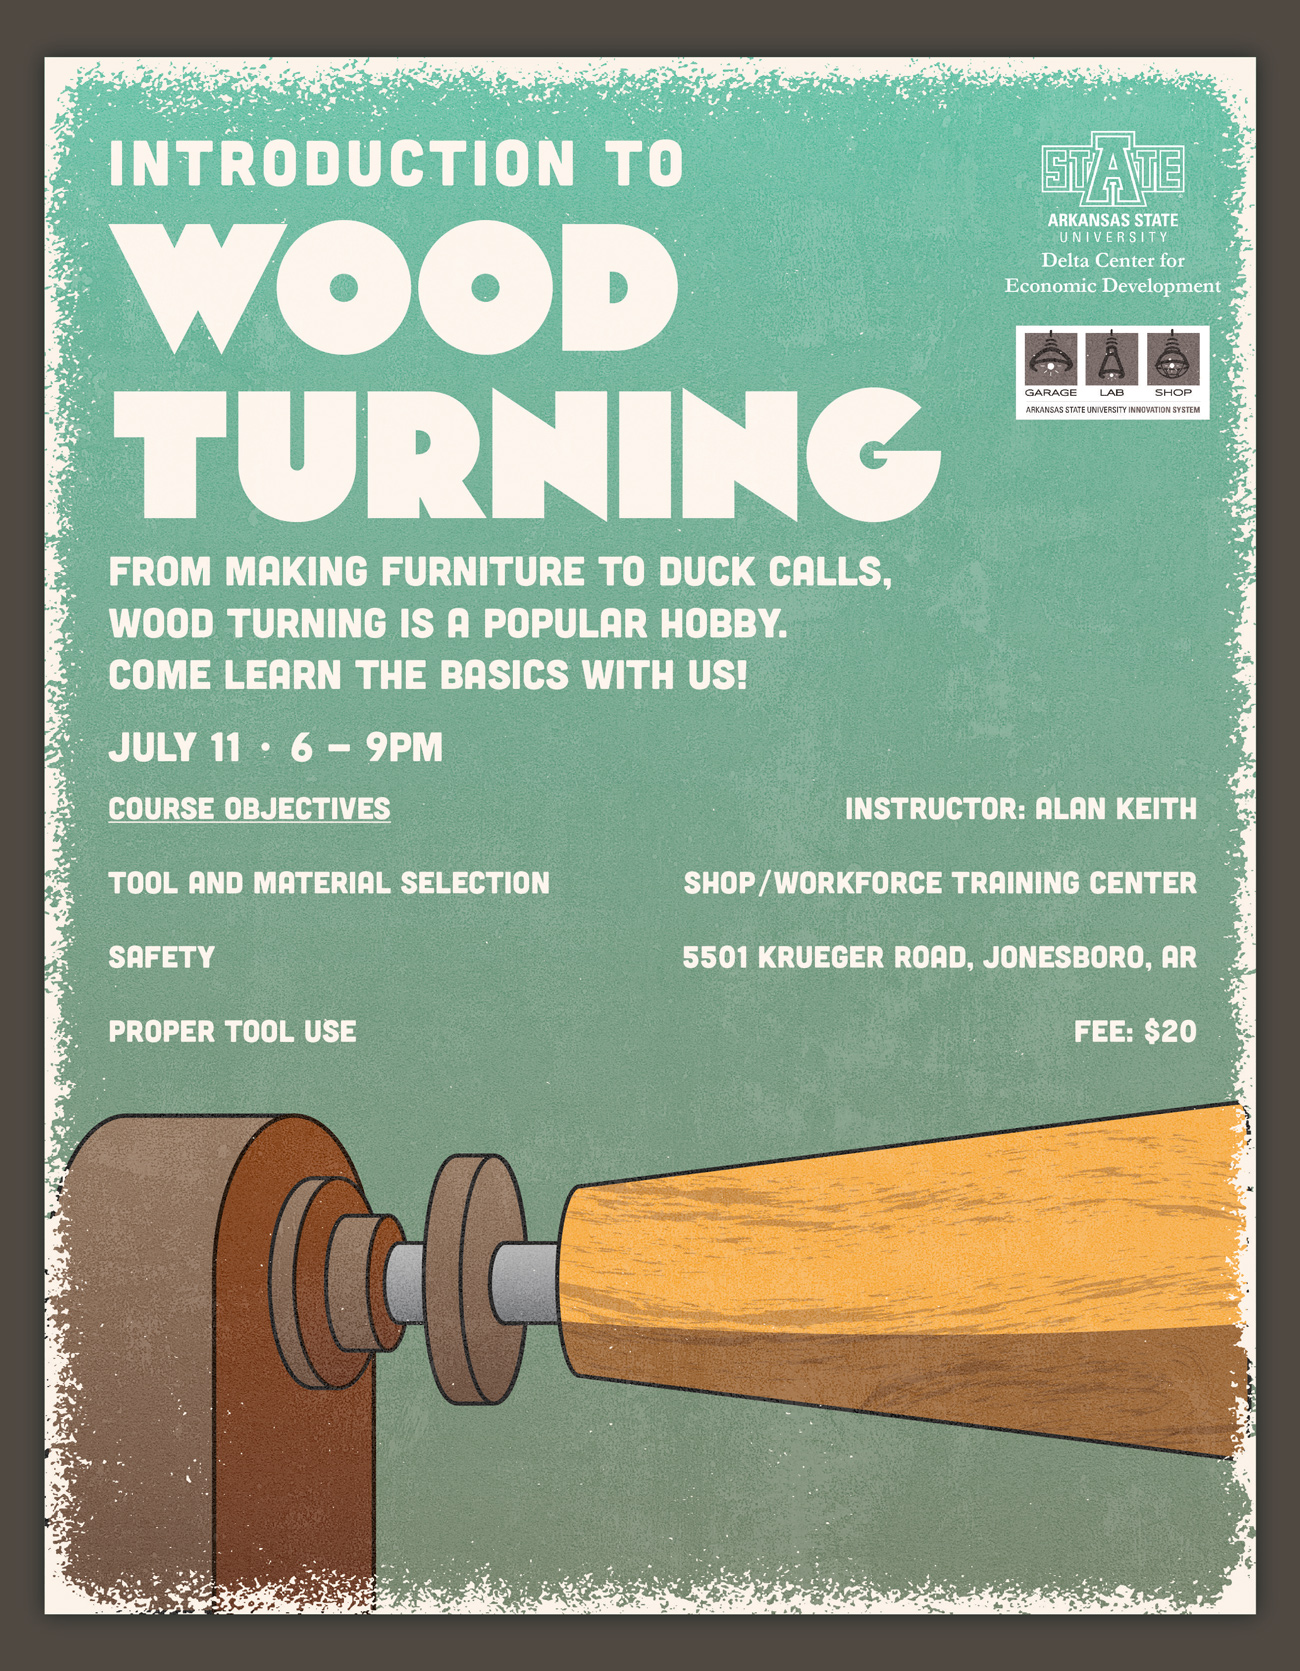 Intro to Wood Turning on July 11 from 6 to 9 p.m.